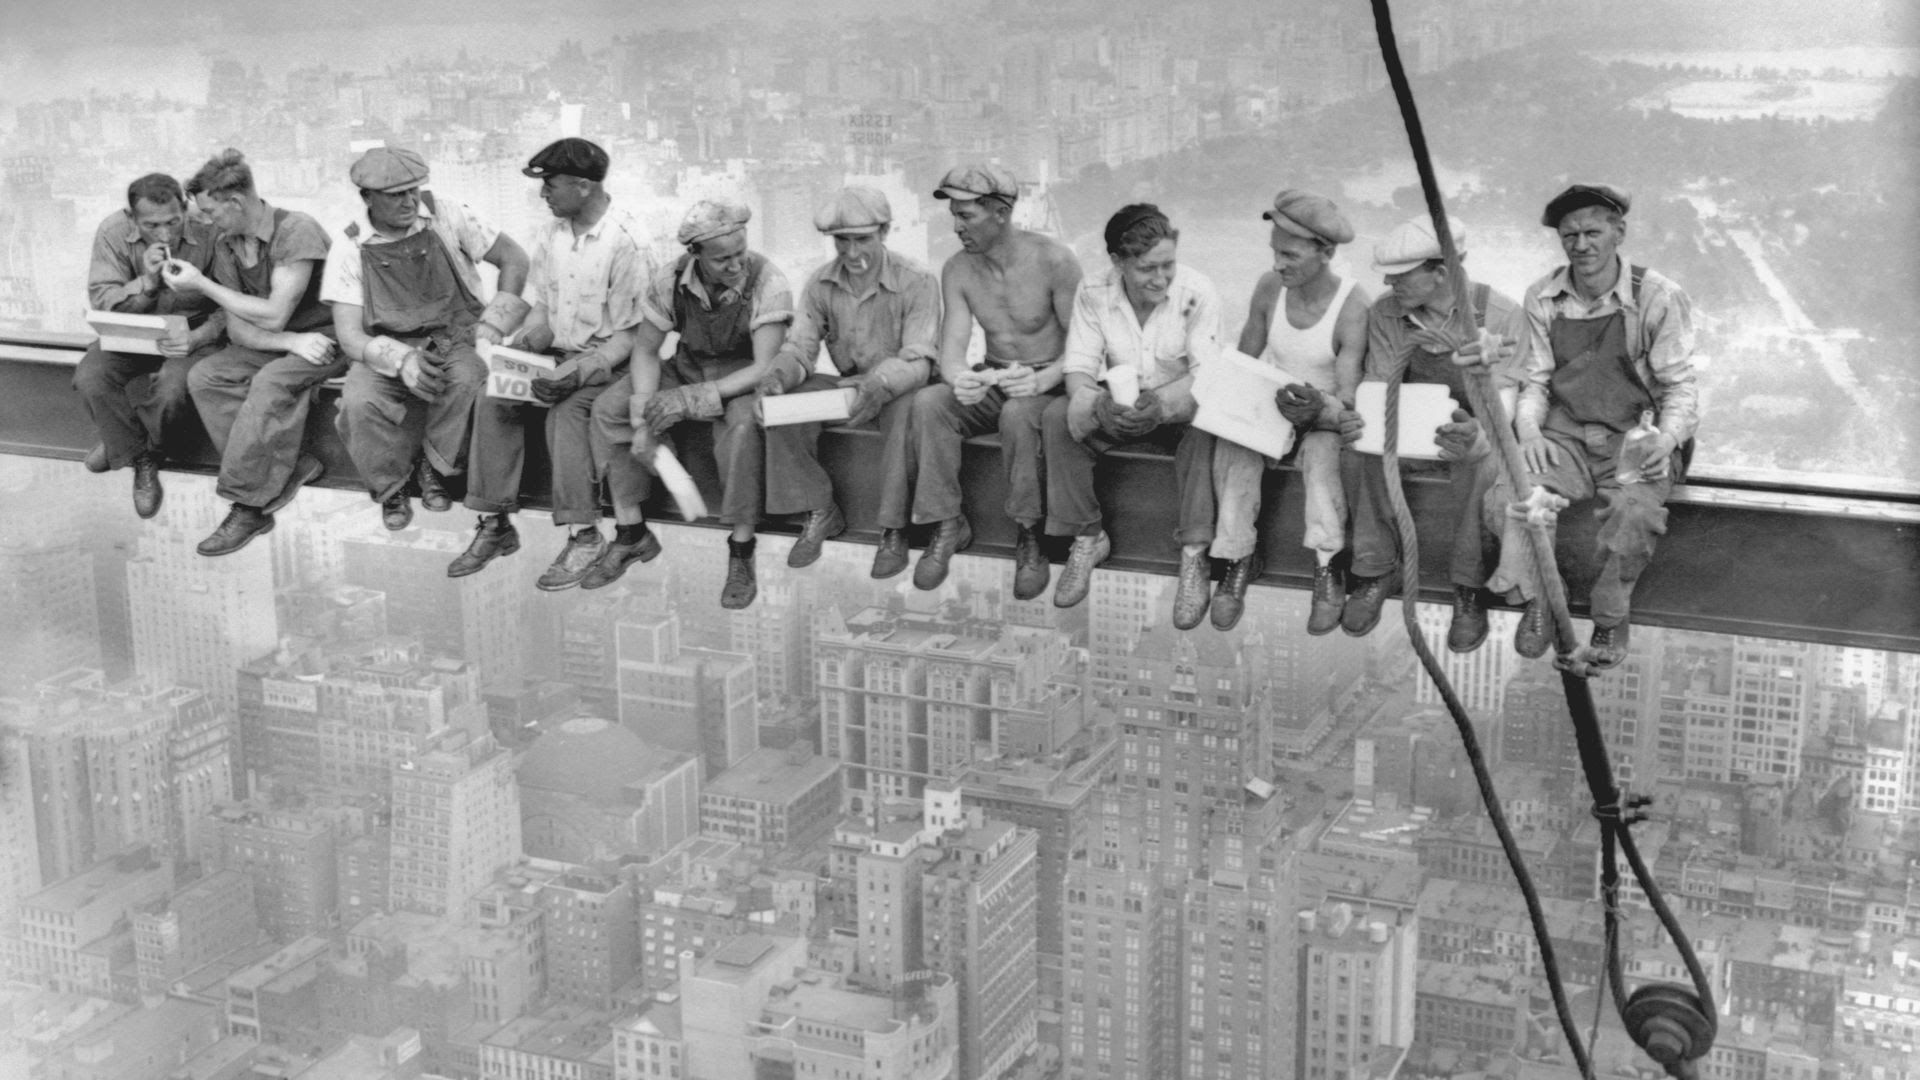 A  bunch of young workers sit on a ledge high above a city. its an old photograph in black and white and the men are wearing caps and overalls